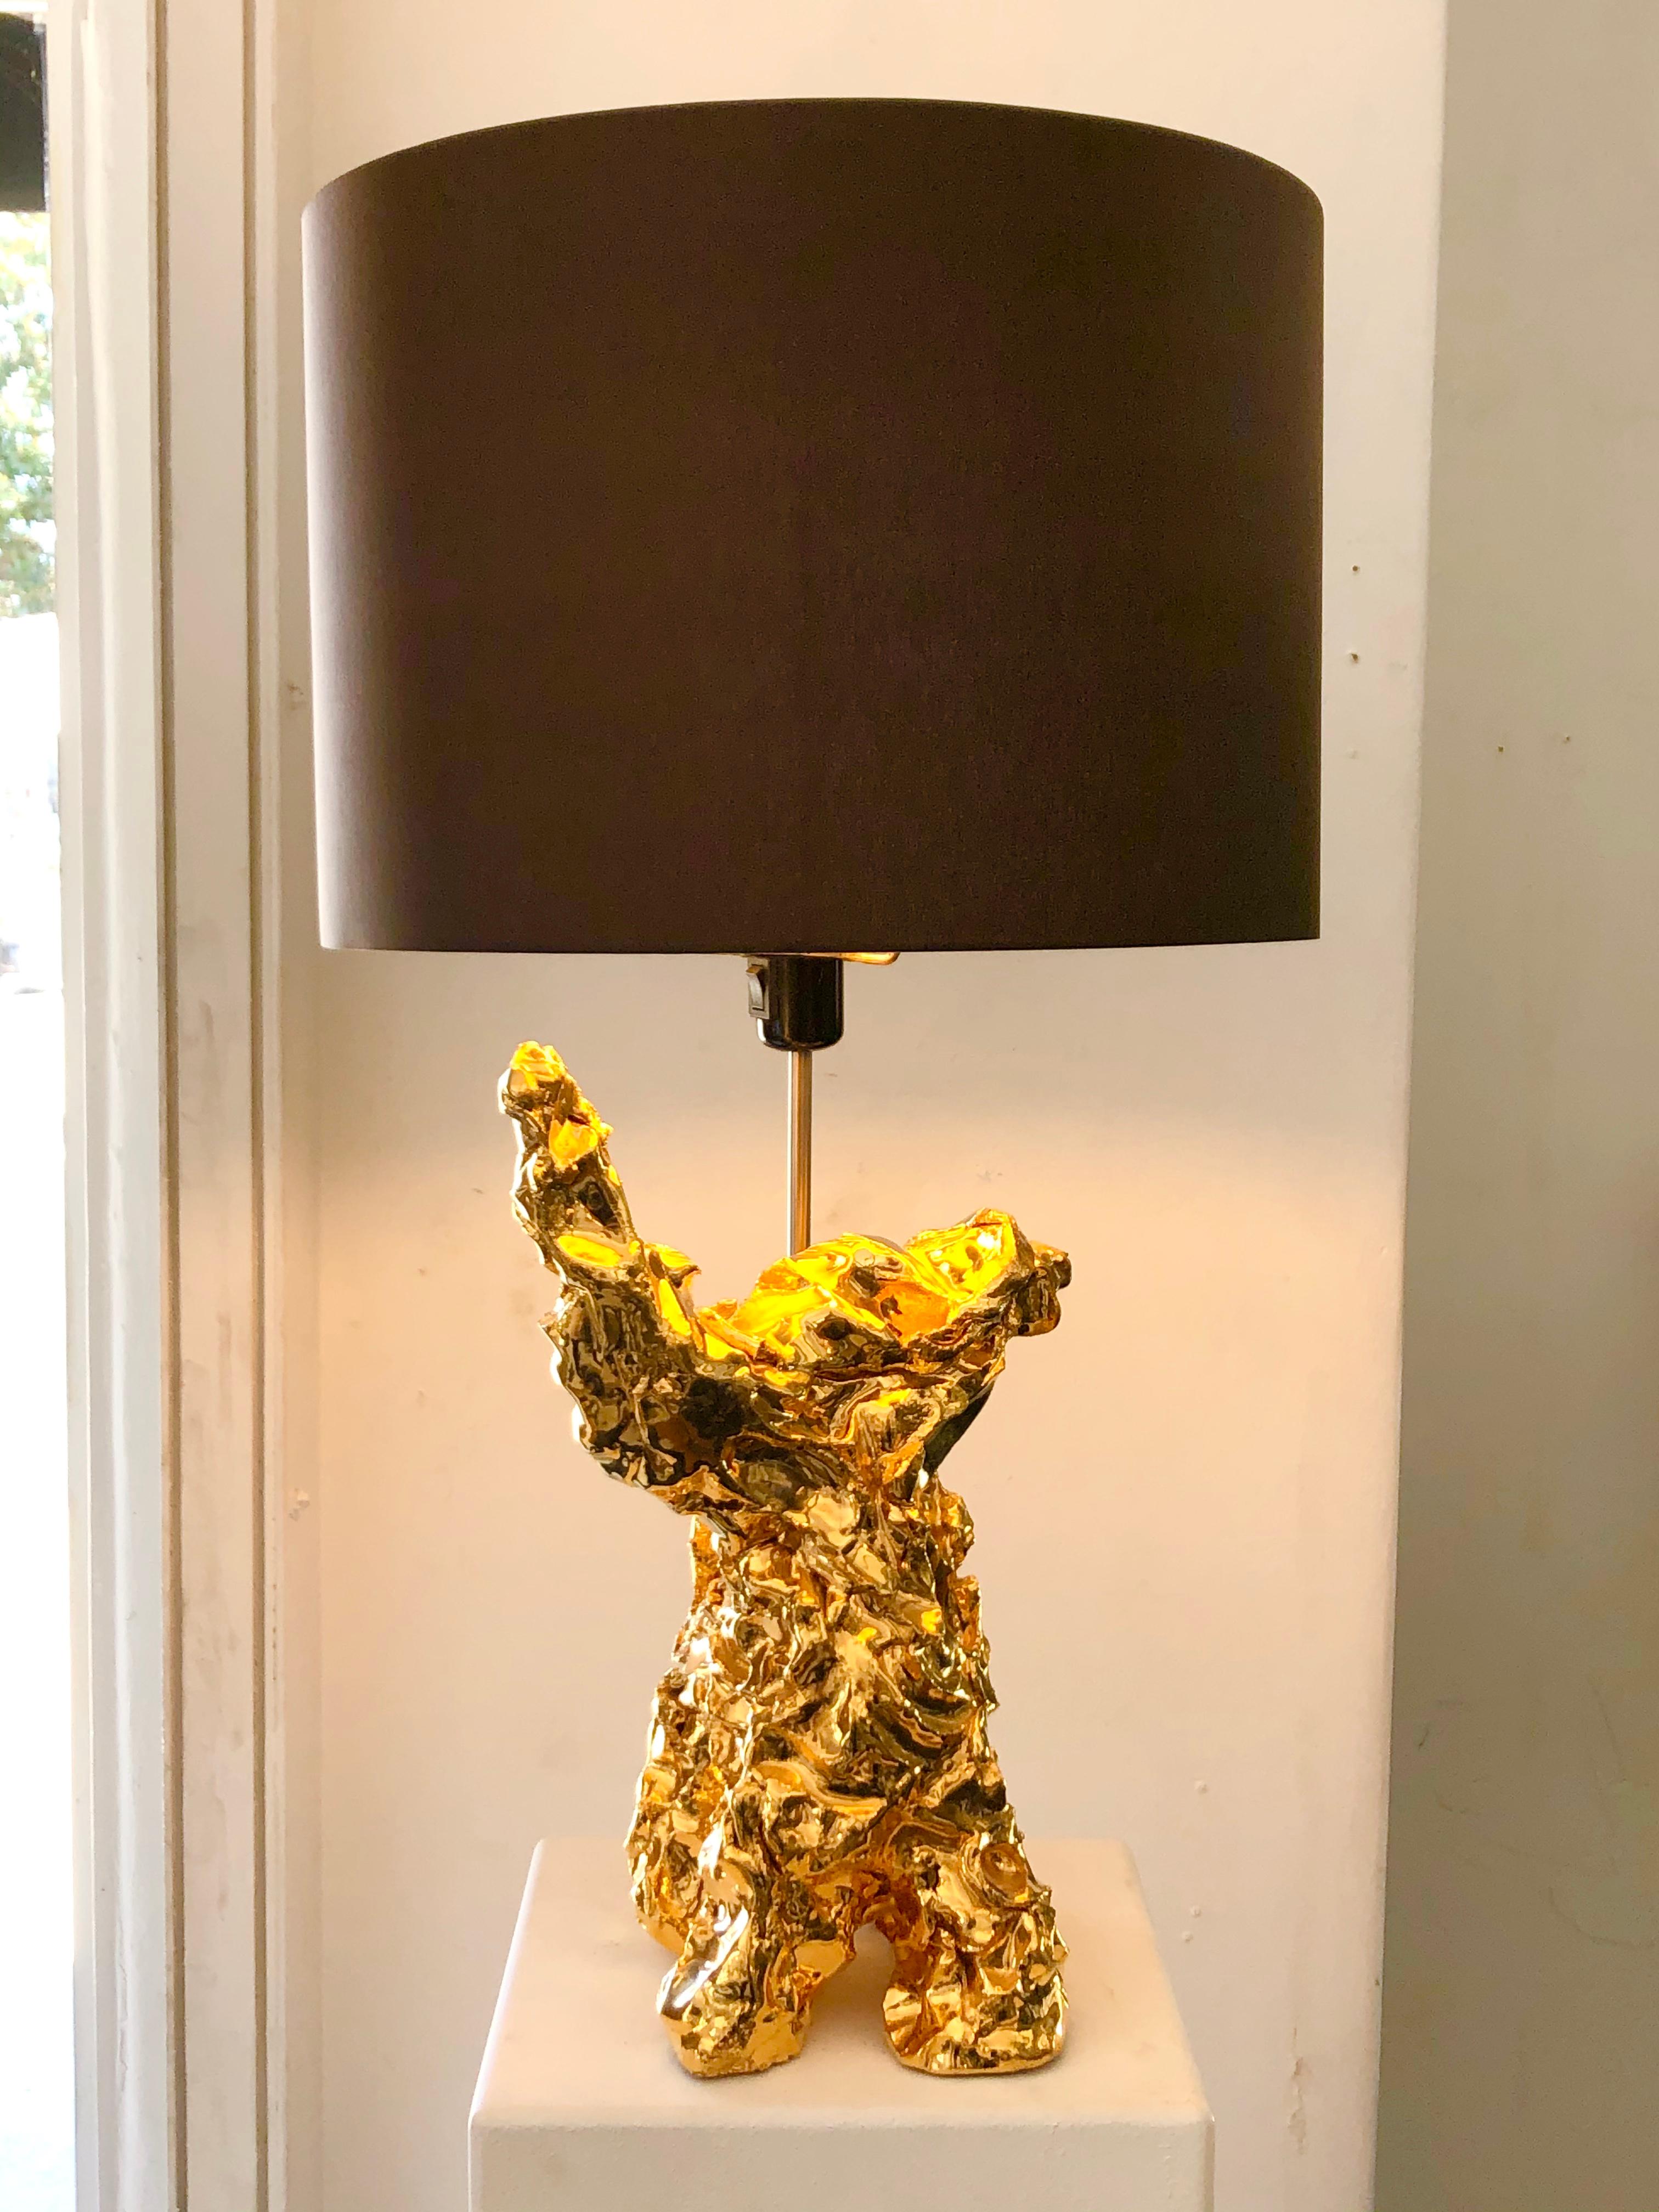 Most unique table lamp by Marcel Wandres. Gilt-glazed ceramic, stainless steel, linen, Netherlands, 2016.
In this limited series, the artist challenged himself to create a sculpture in no less than one minute from a shapeless pile of clay. He was